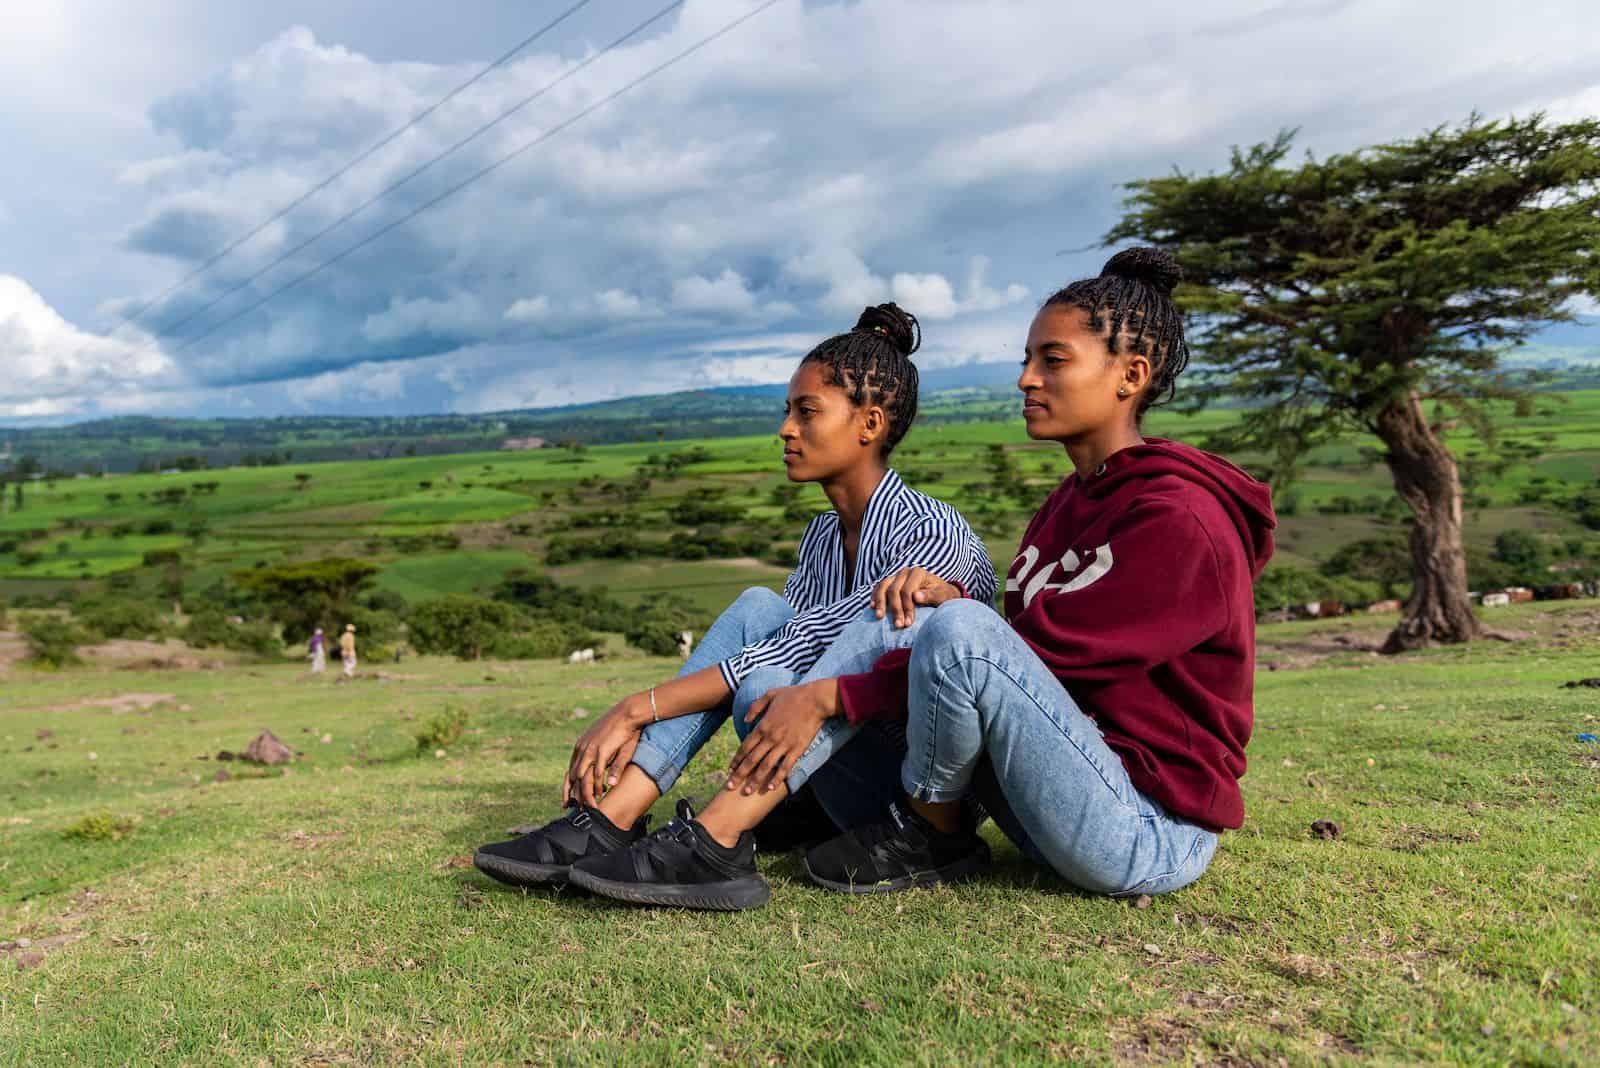 An orphan story: Two teenage girls sit on a hill and look to the distance.